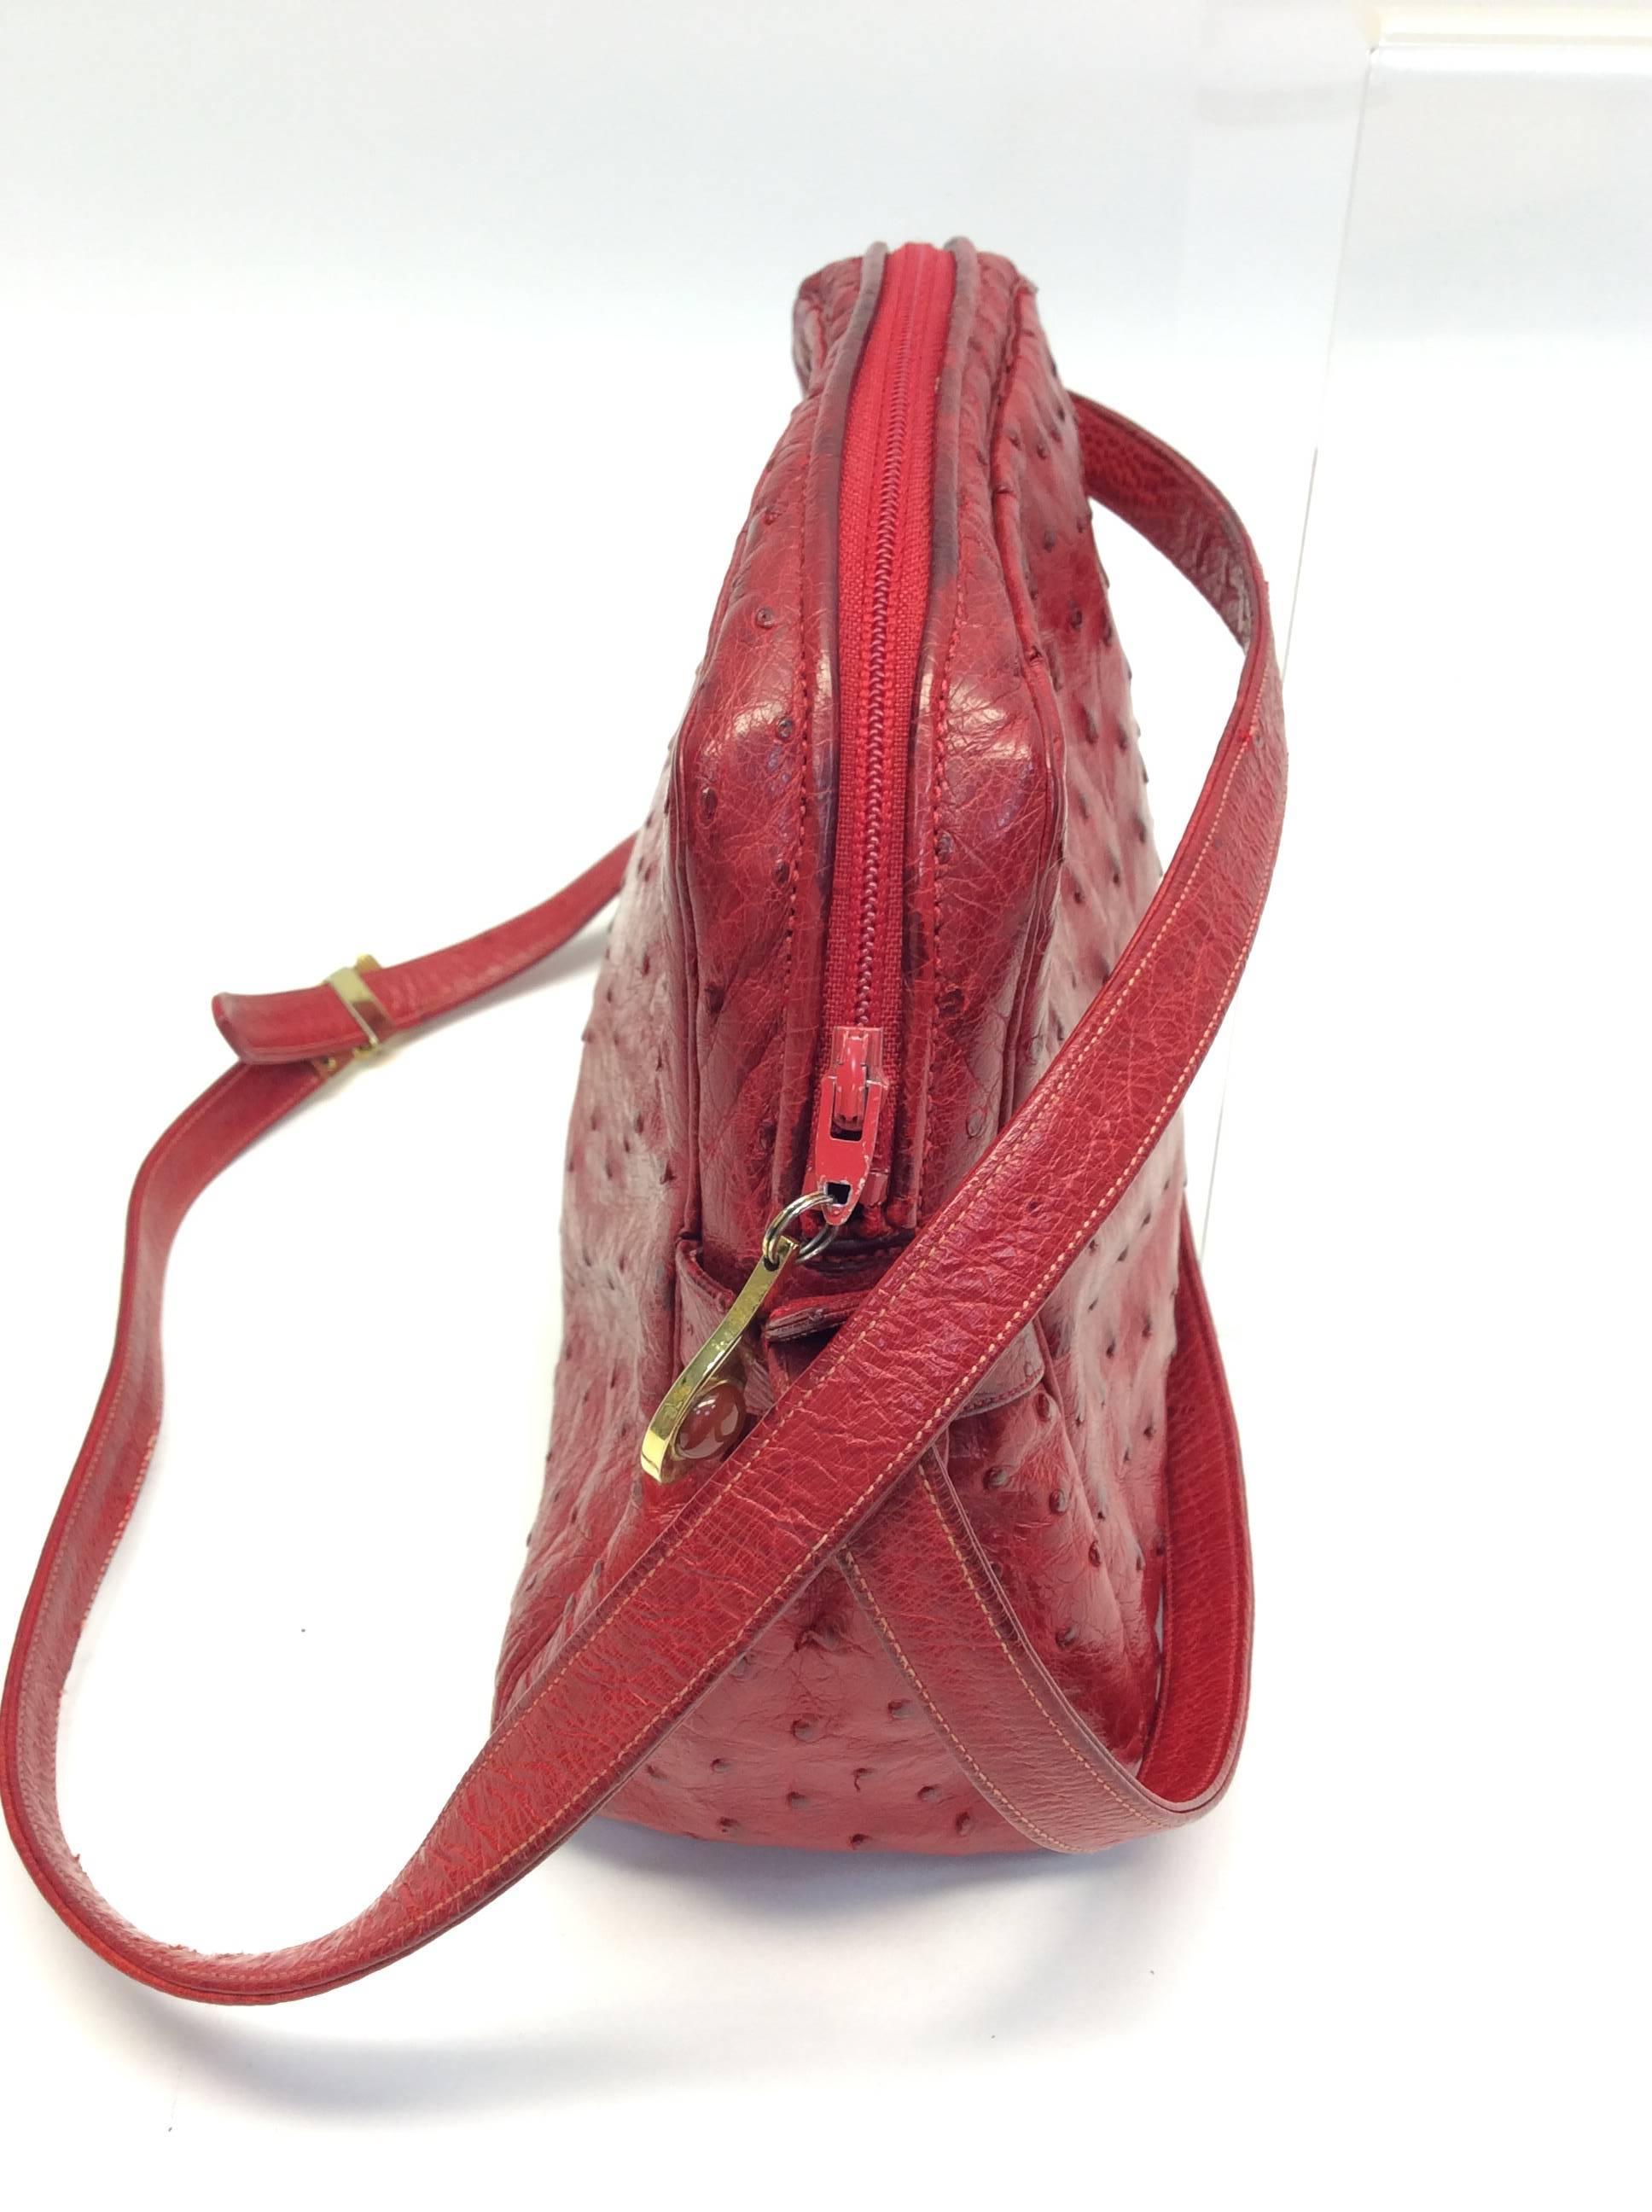 Judith Leiber Red Ostrich Leather Vintage Crossbody
100% Ostrich Leather
$399
9